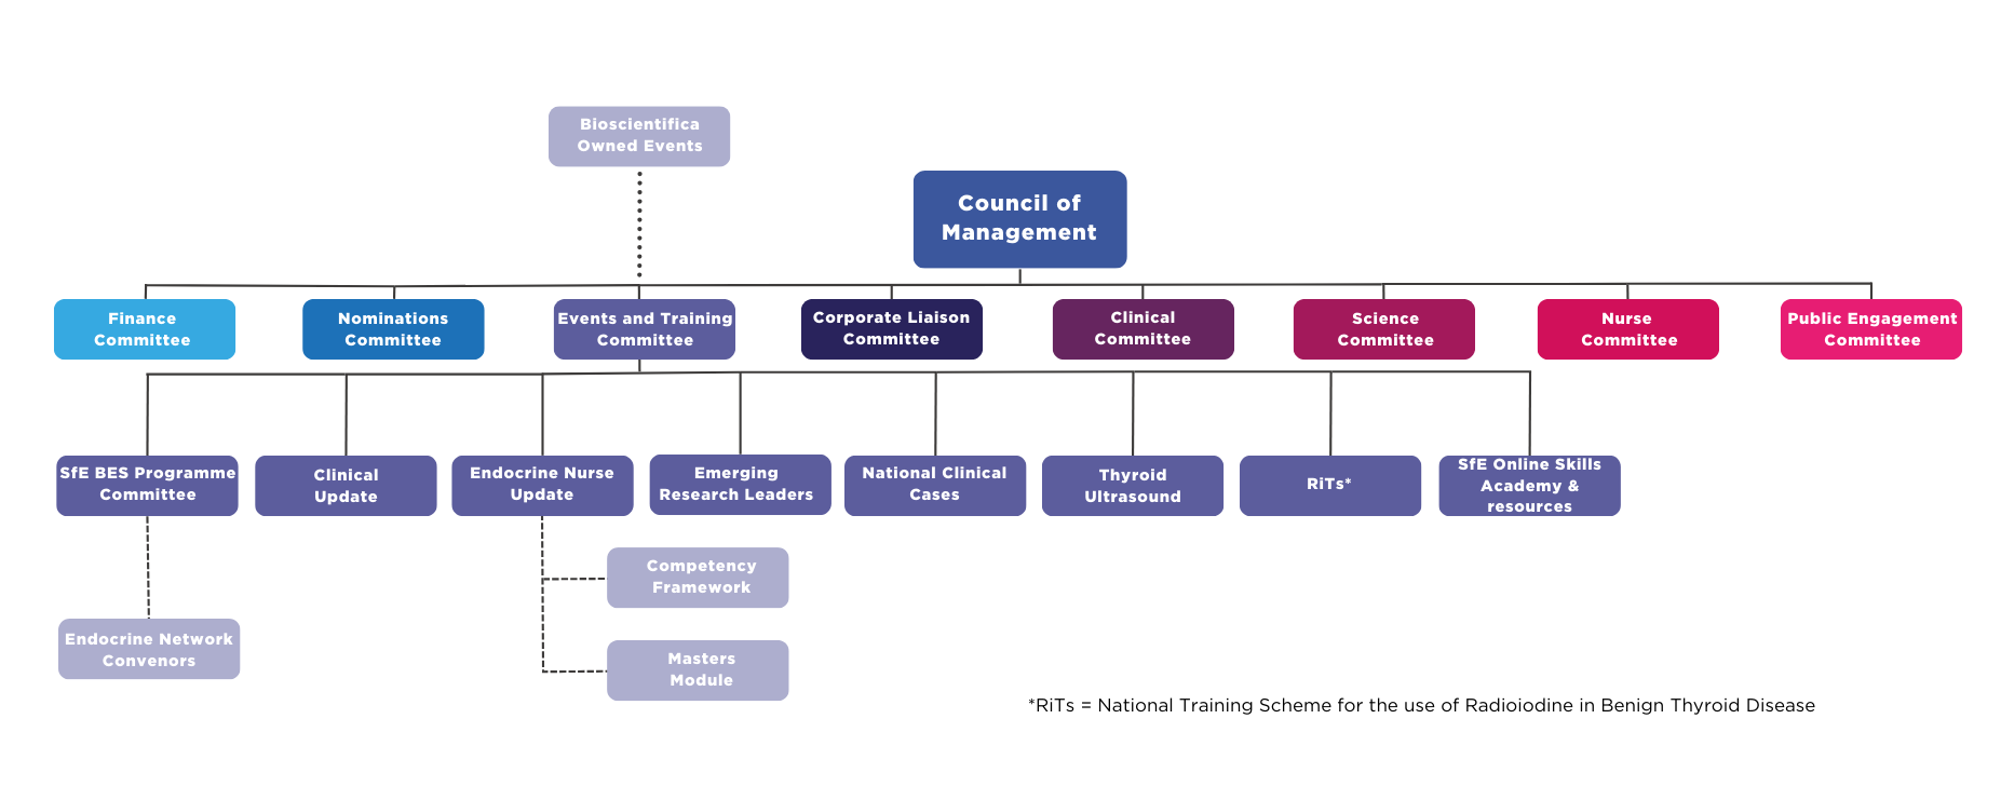 Society Council and committees organisational structure